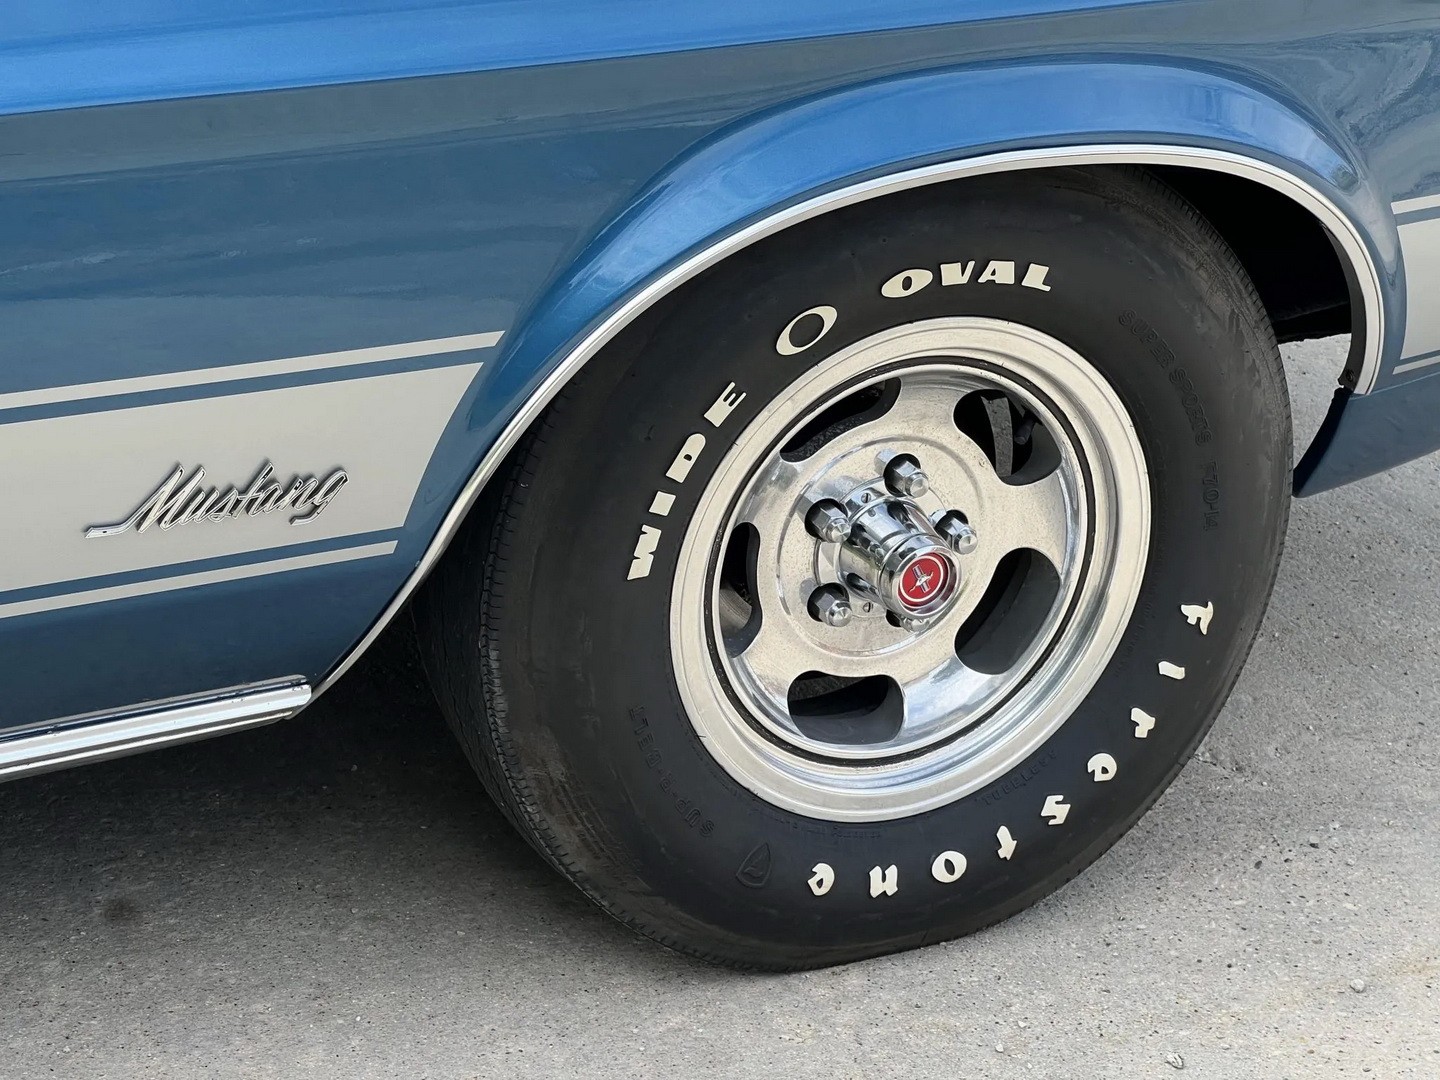 This 1973 Ford Mustang Mach 1 Slept in a Garage for 45 Years, Probably ...